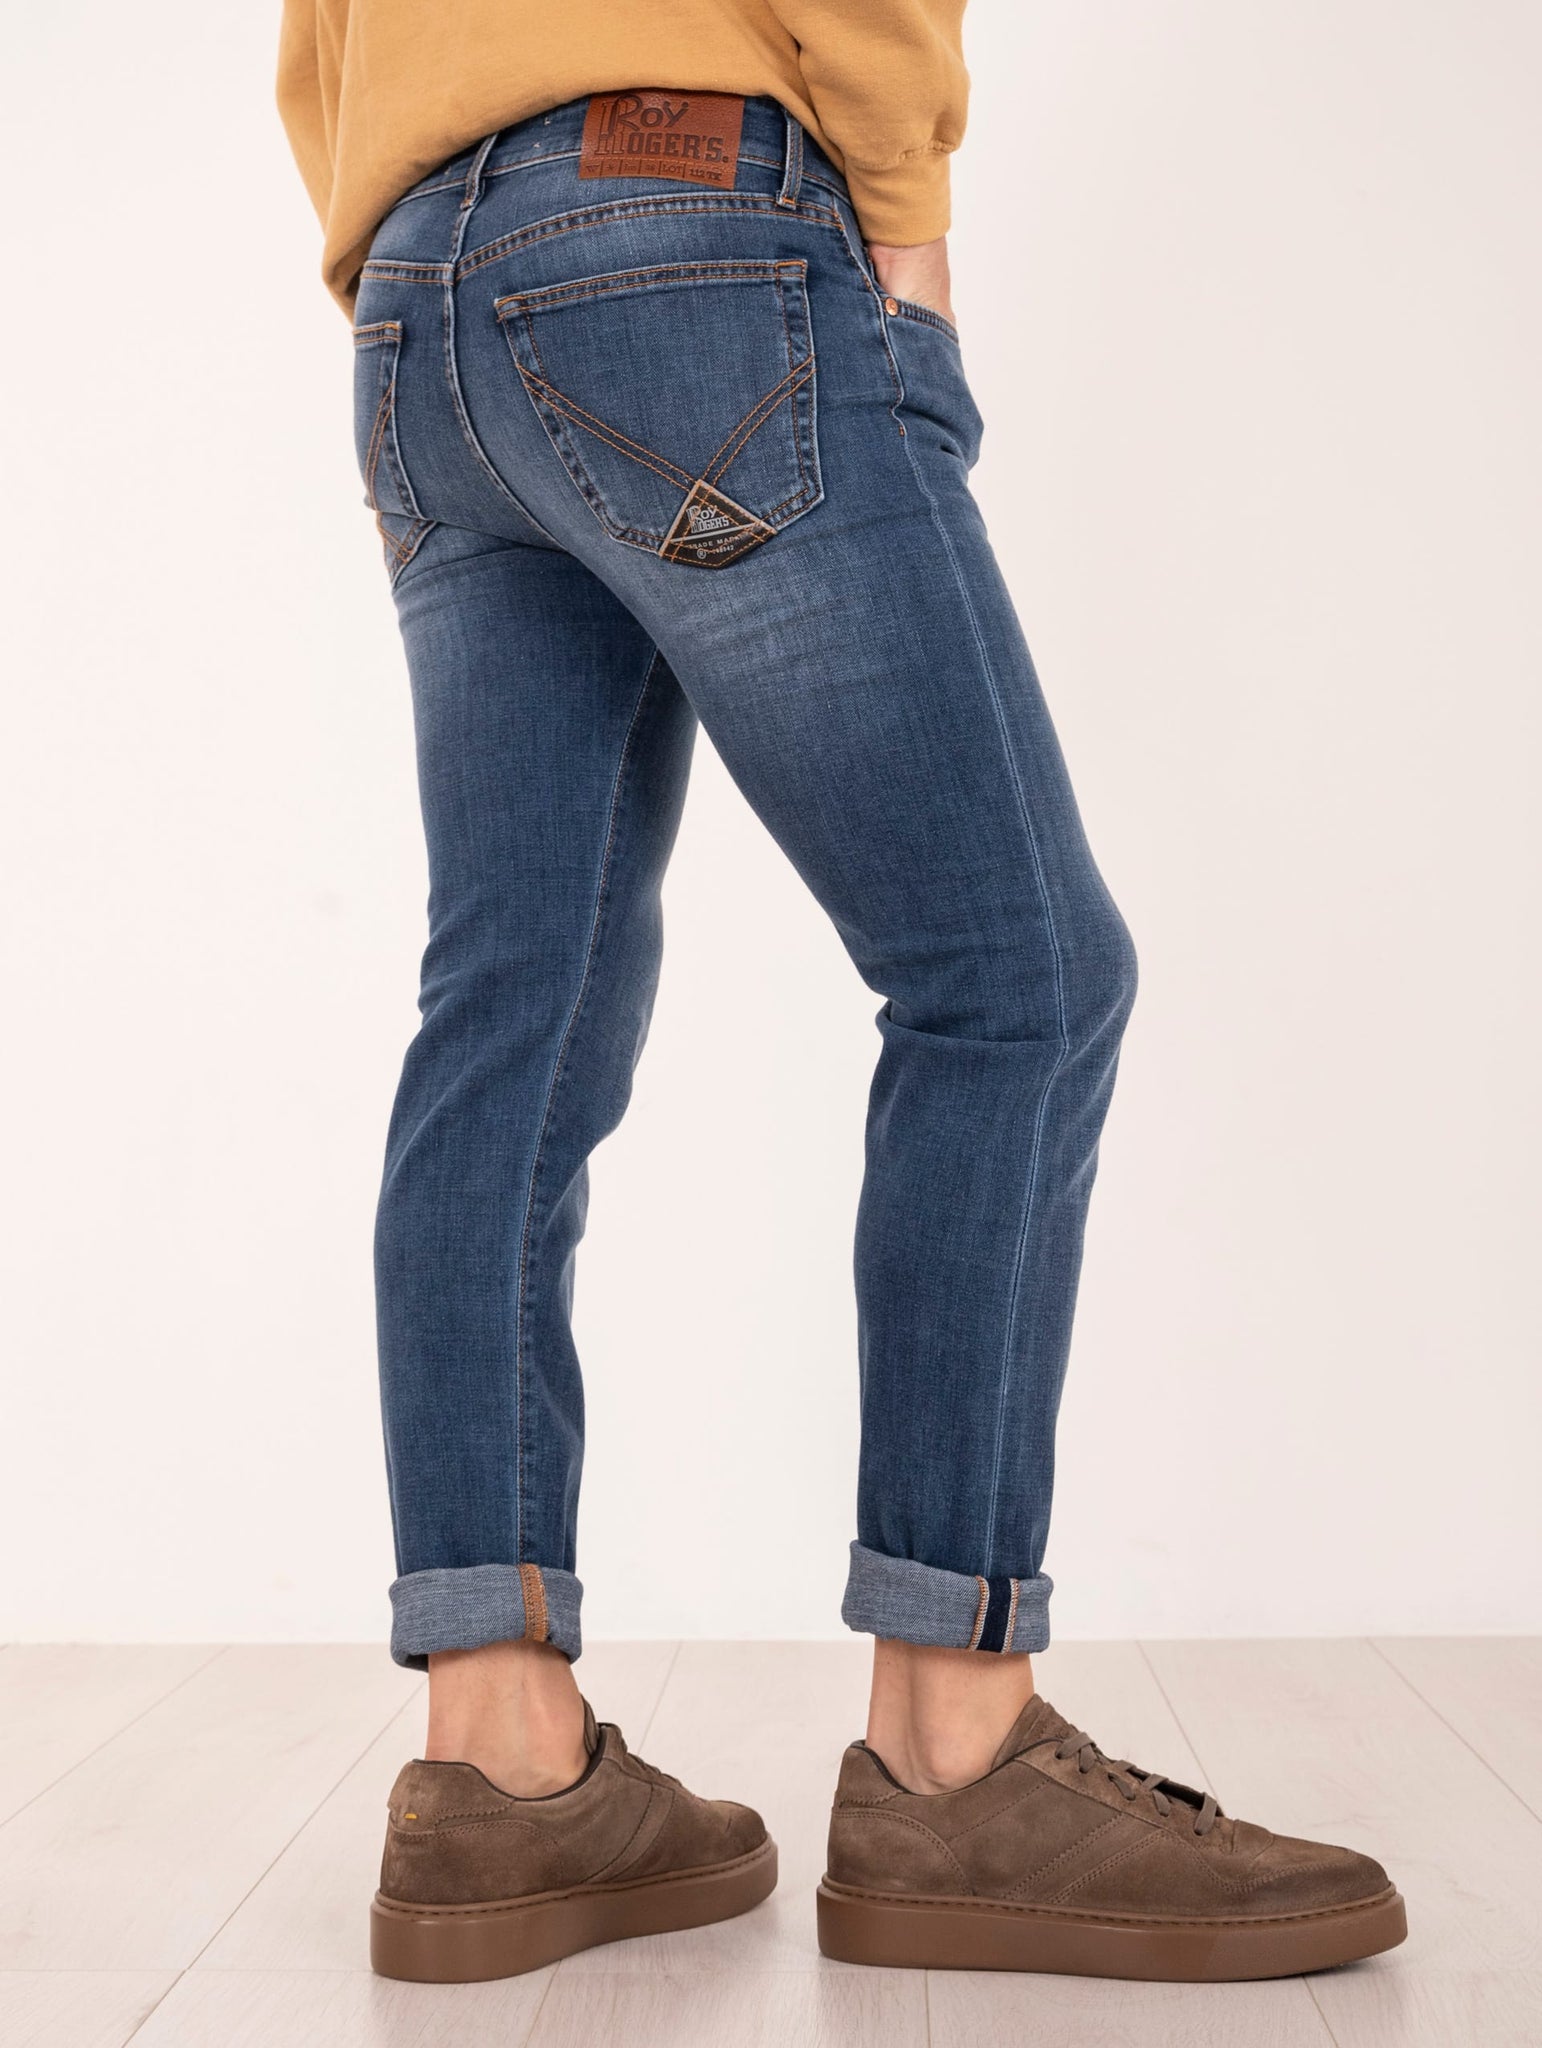 Jeans Roy Roger's World Trade in Denim Candiani Medio